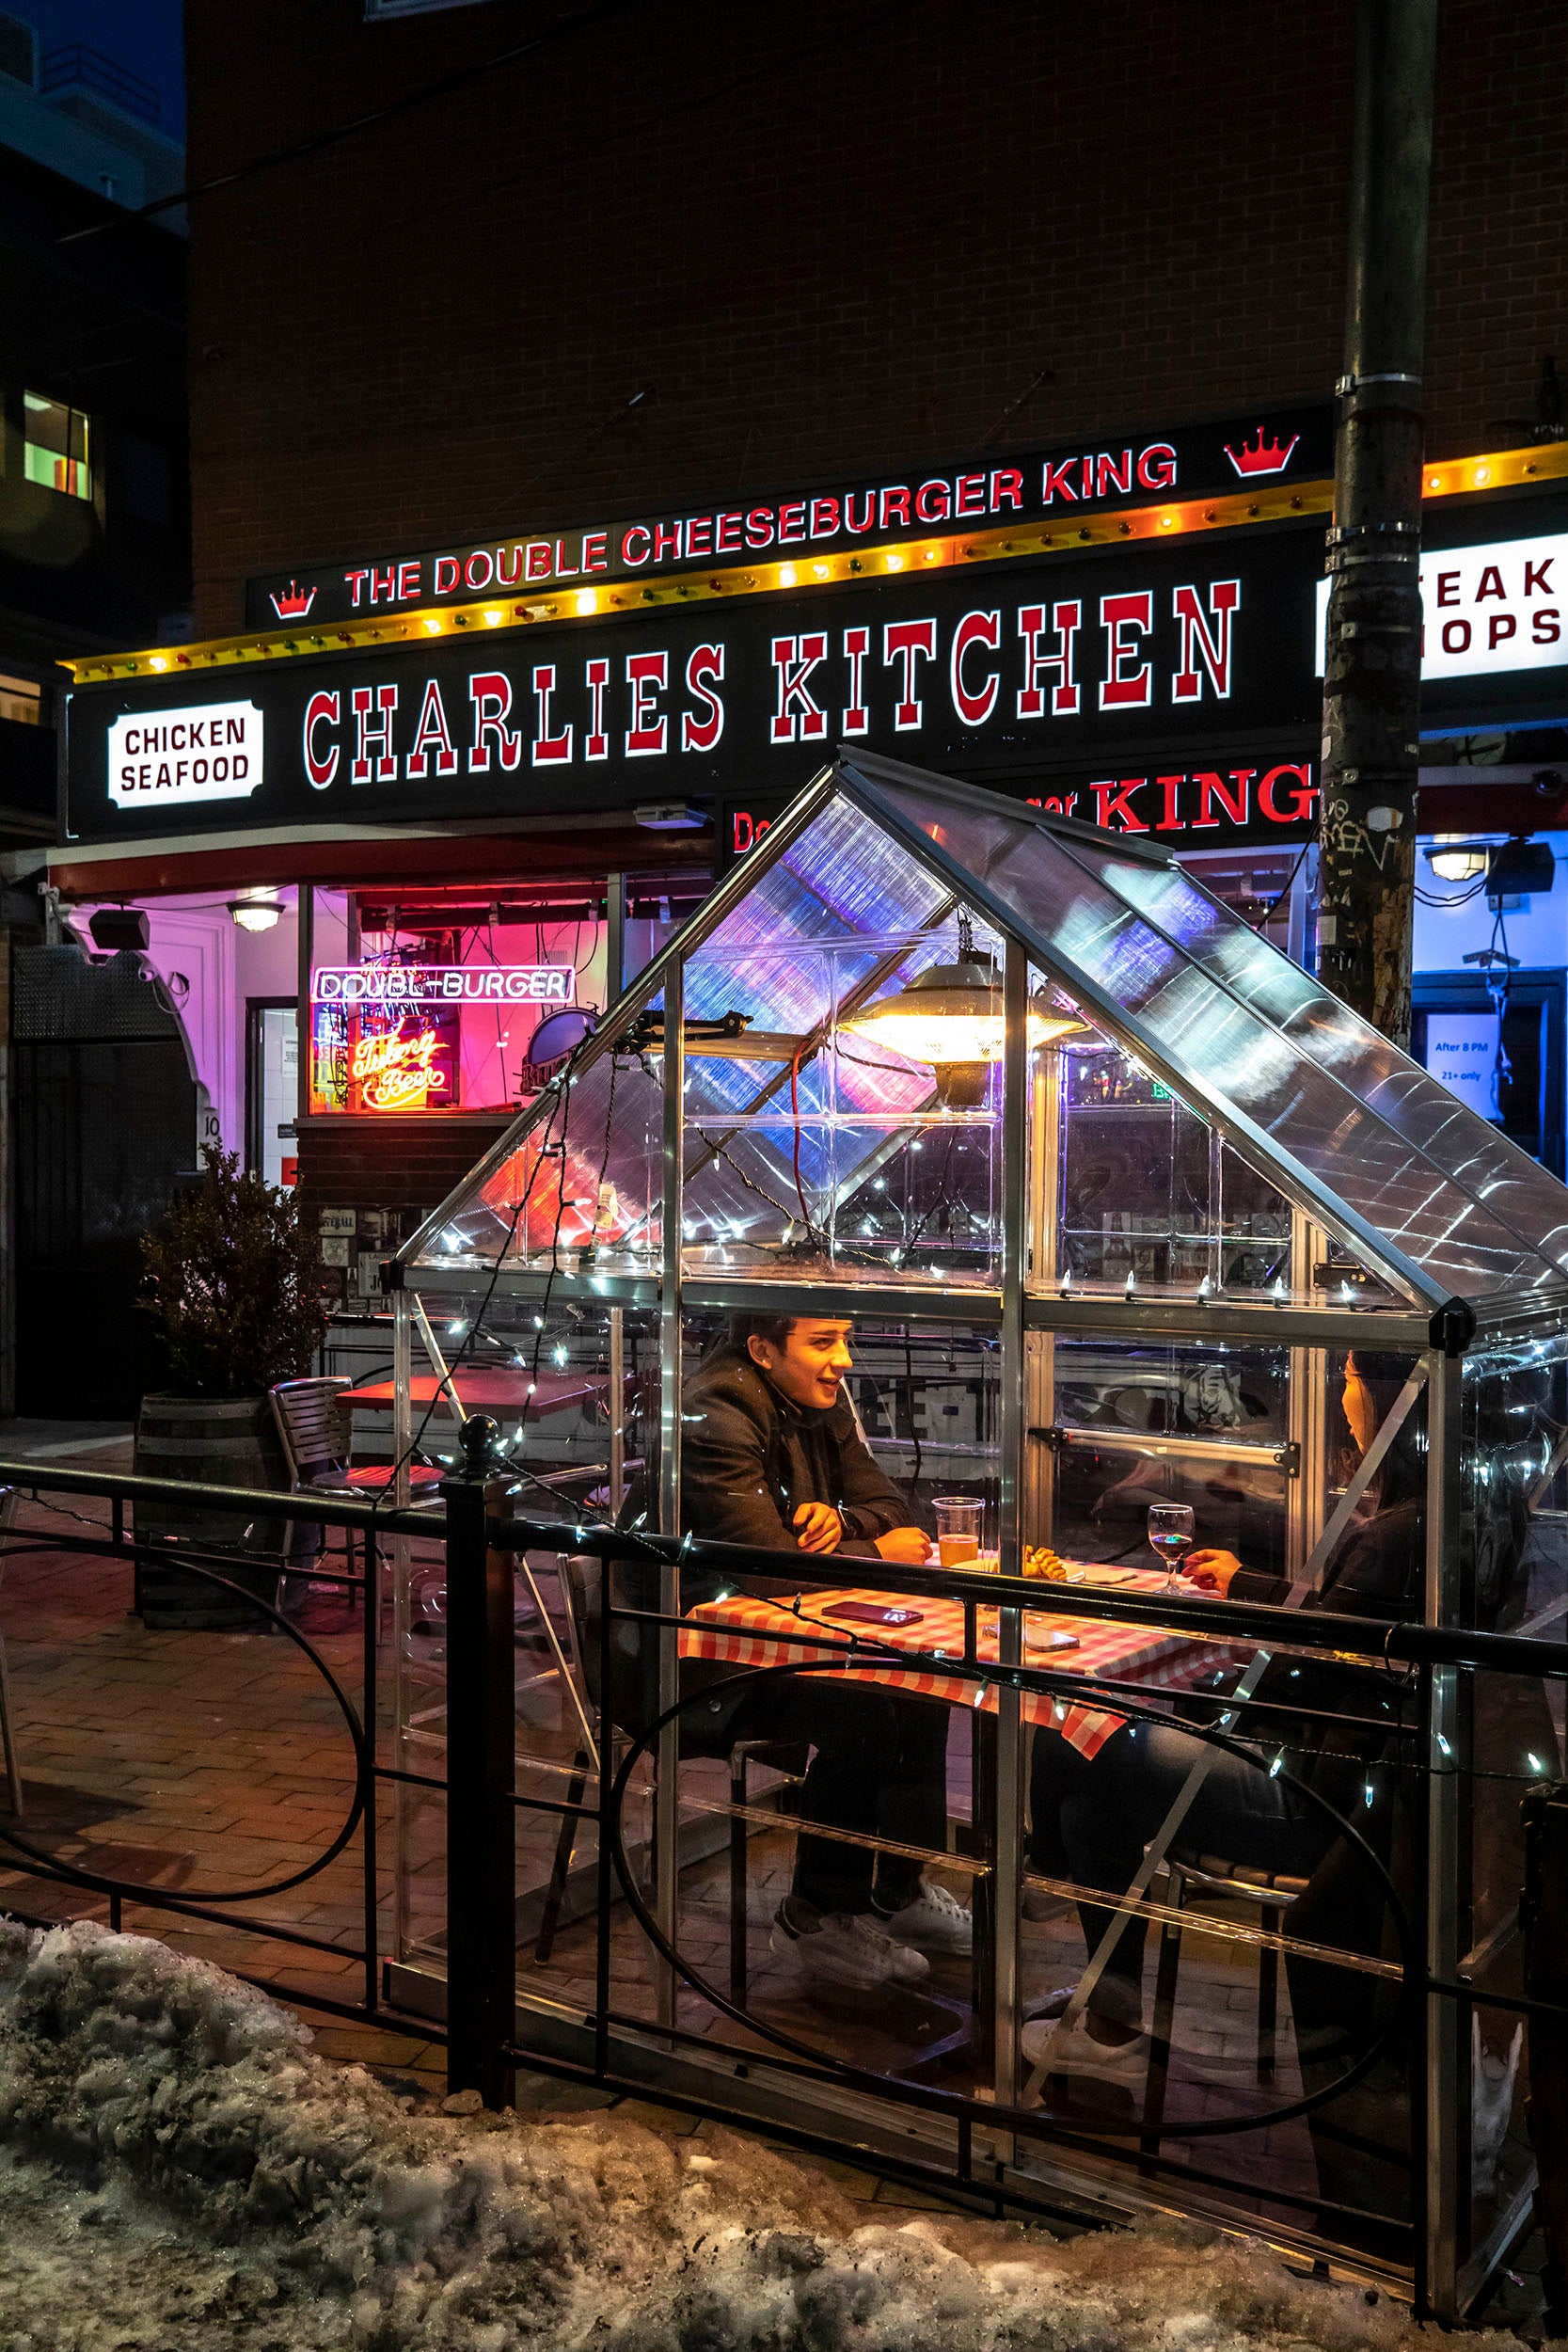 An outdoor pod is pictured on Eliot Street outside Charlie's Kitchen.